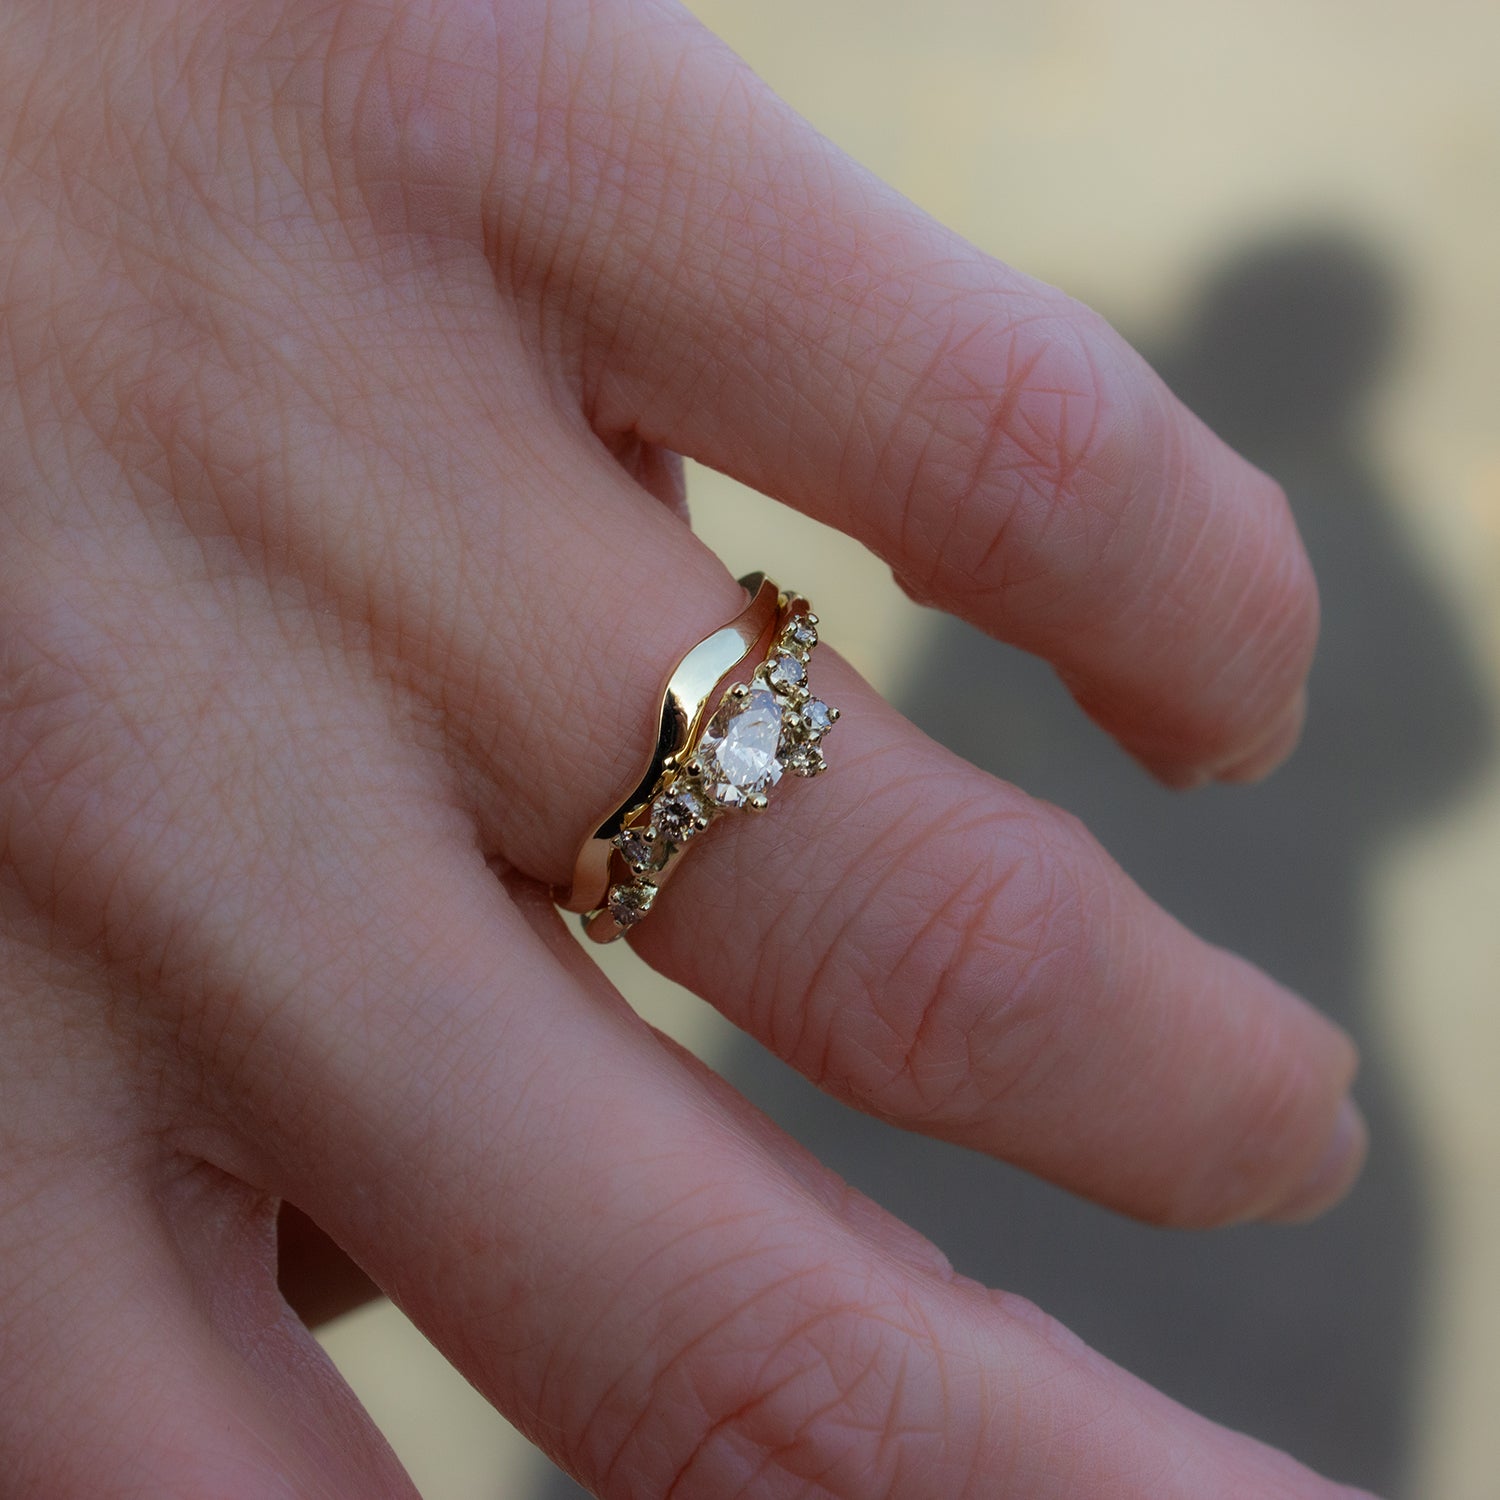 Organically shaped, flowy gold band. Paired with perfectly matching, champagne diamond ring.